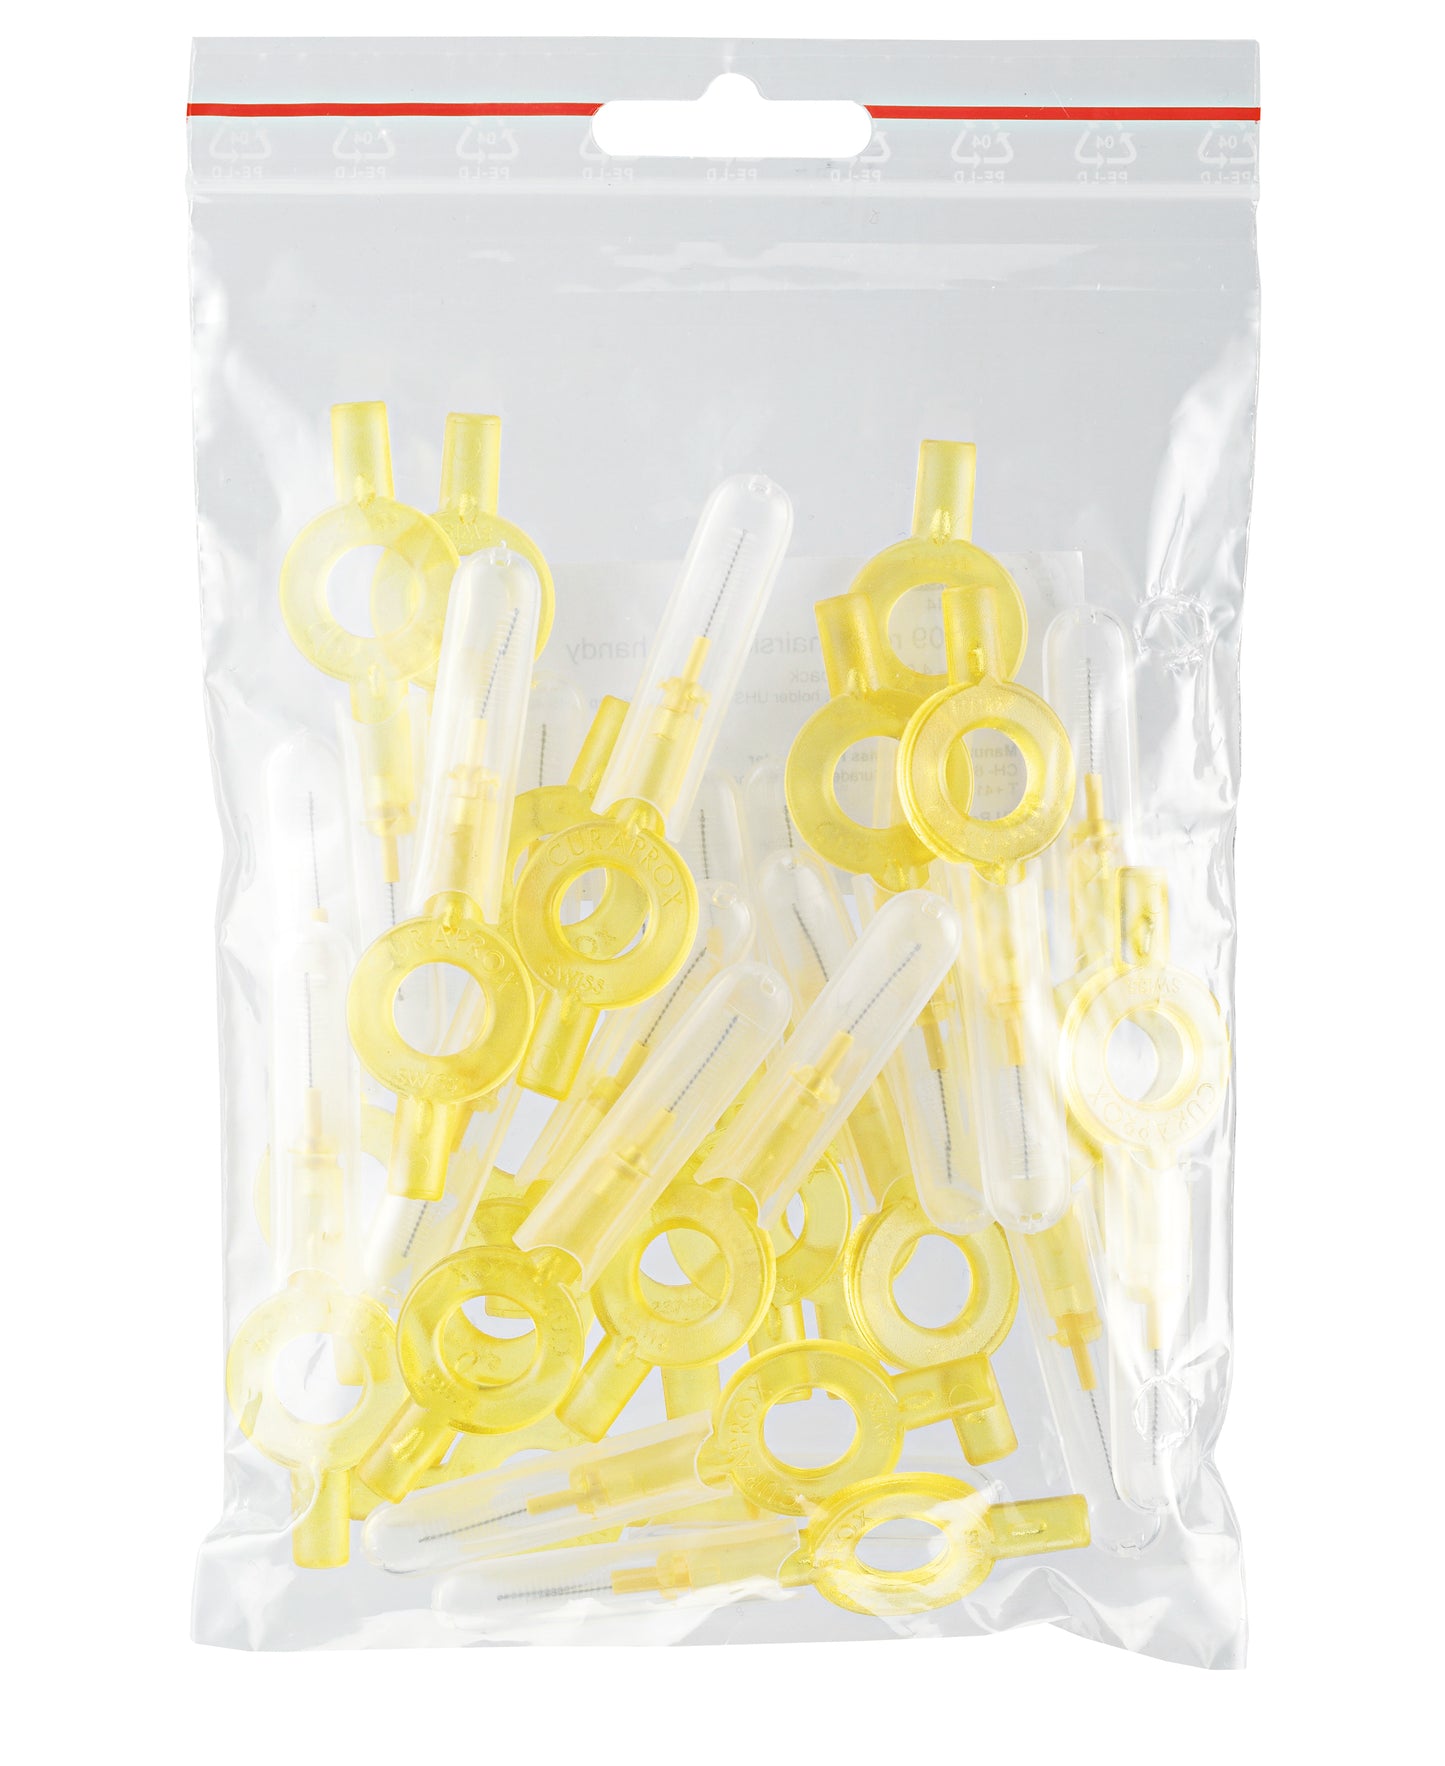 Curaprox Interdental Brushes Cps09 Bag Of 50